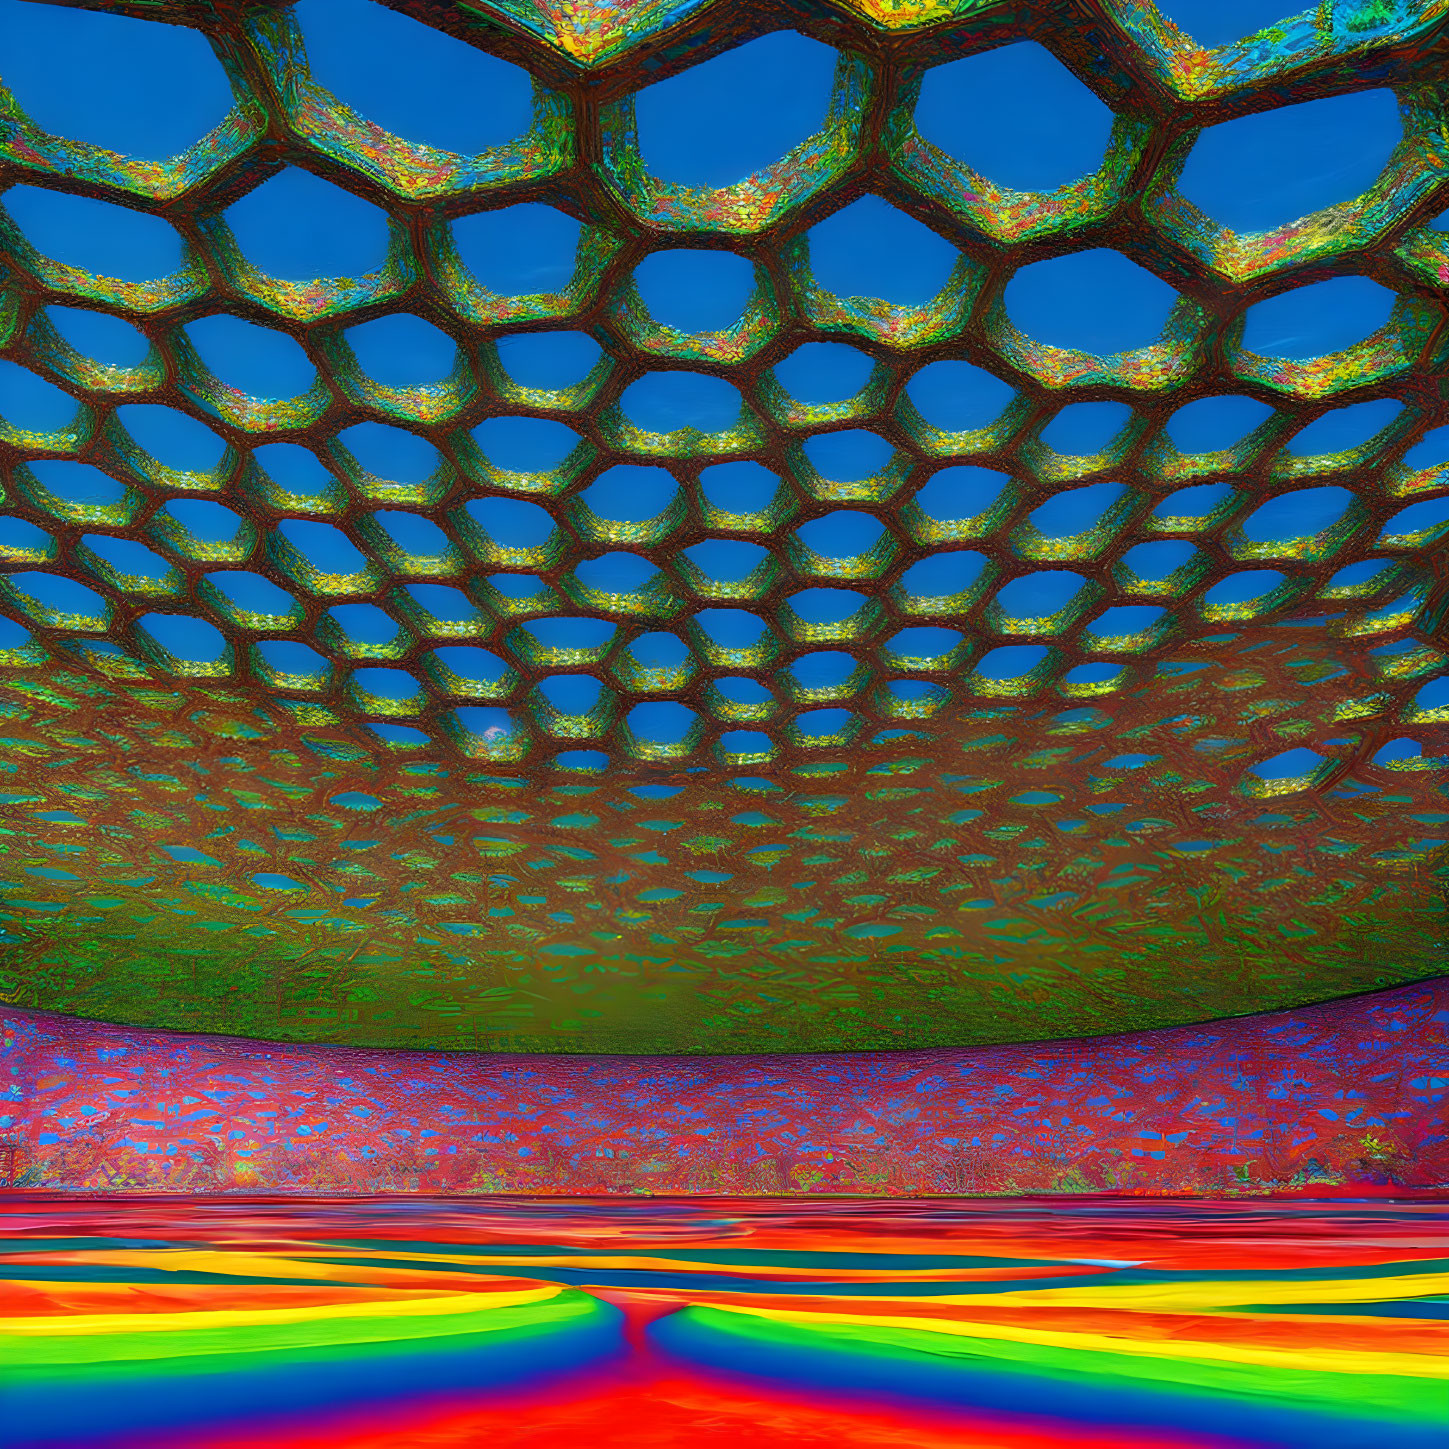 Colorful Psychedelic Interior with Honeycomb-Patterned Ceiling